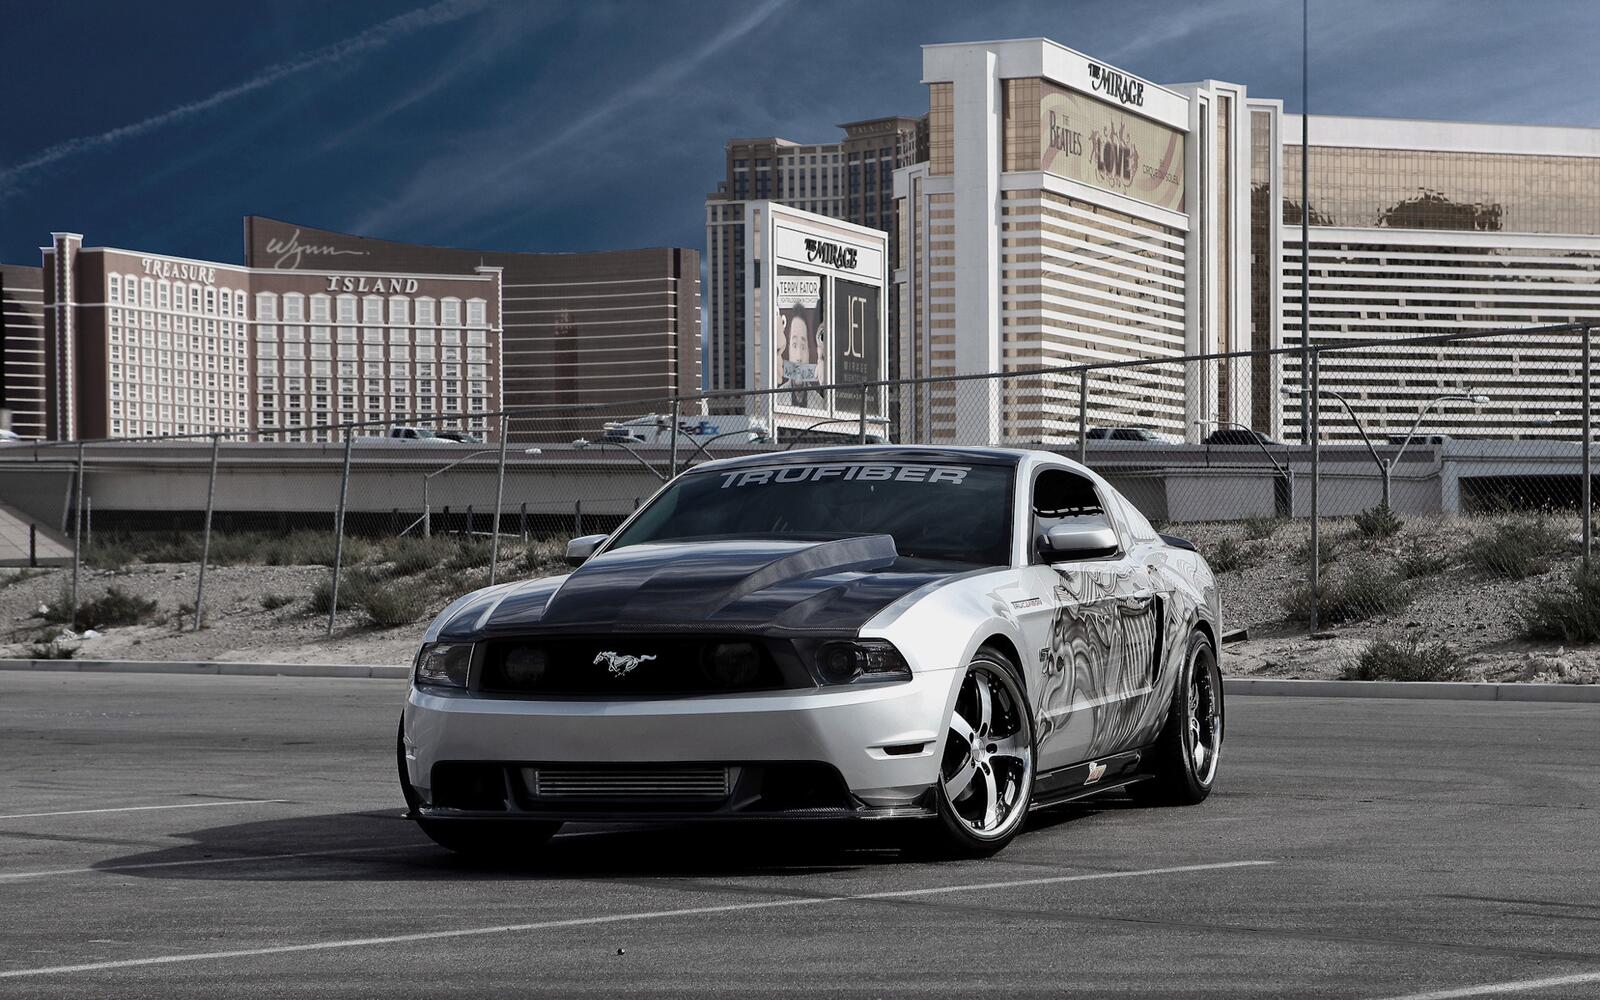 Wallpapers Ford mustang hood on the desktop